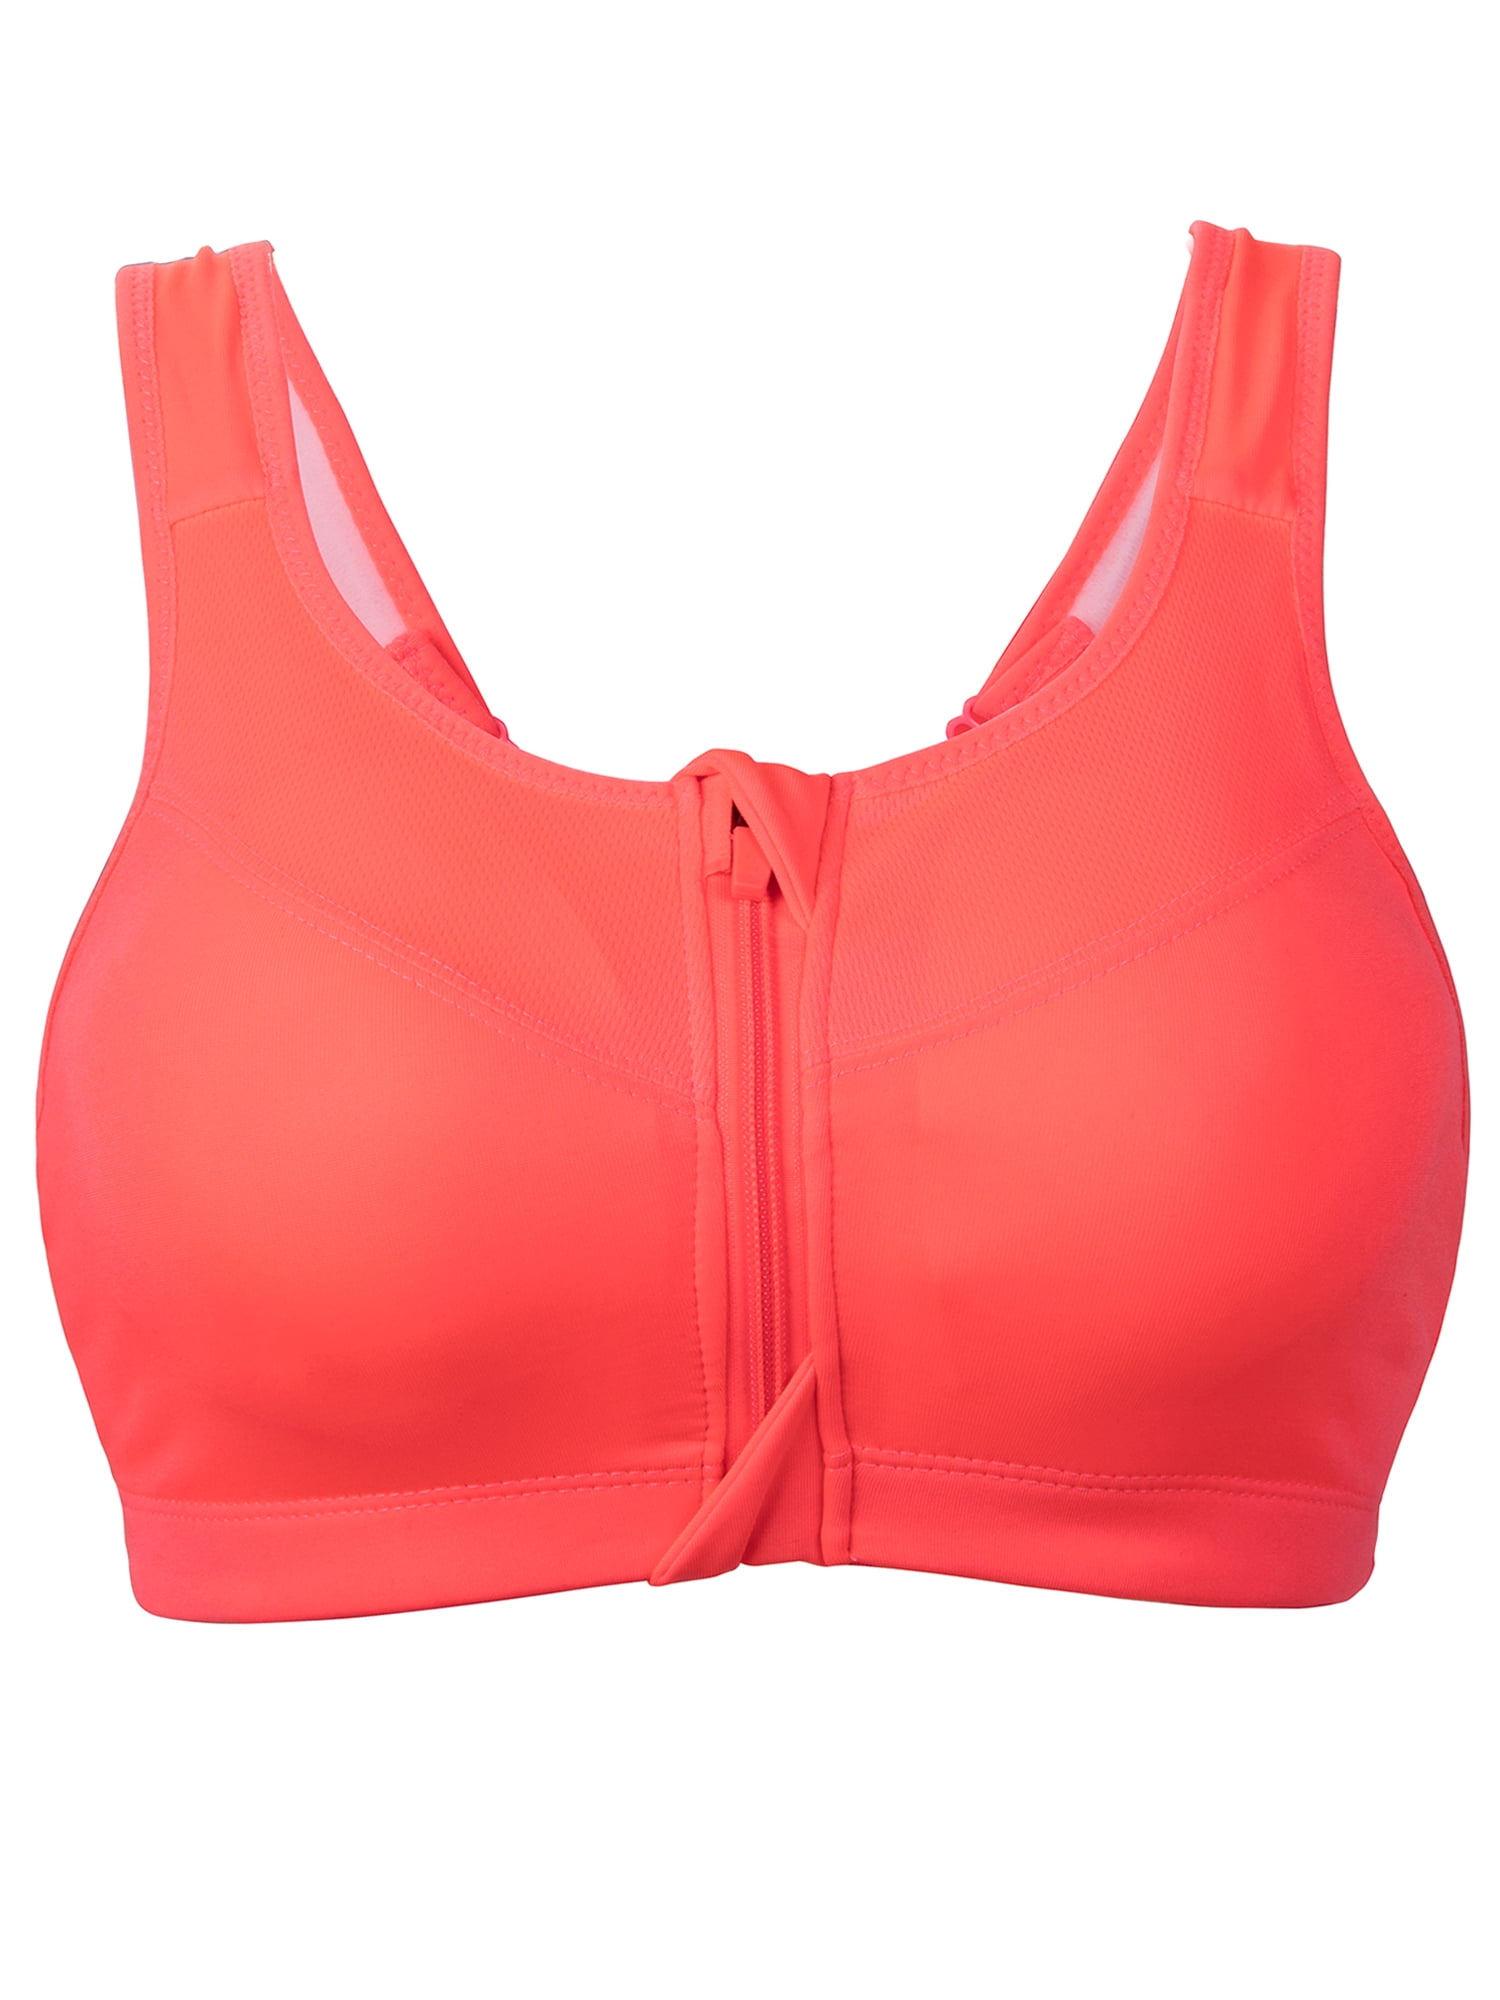 Women Wireless Padded Sports Bra Front Closure Bra Cami Push Up Support Top Hot 